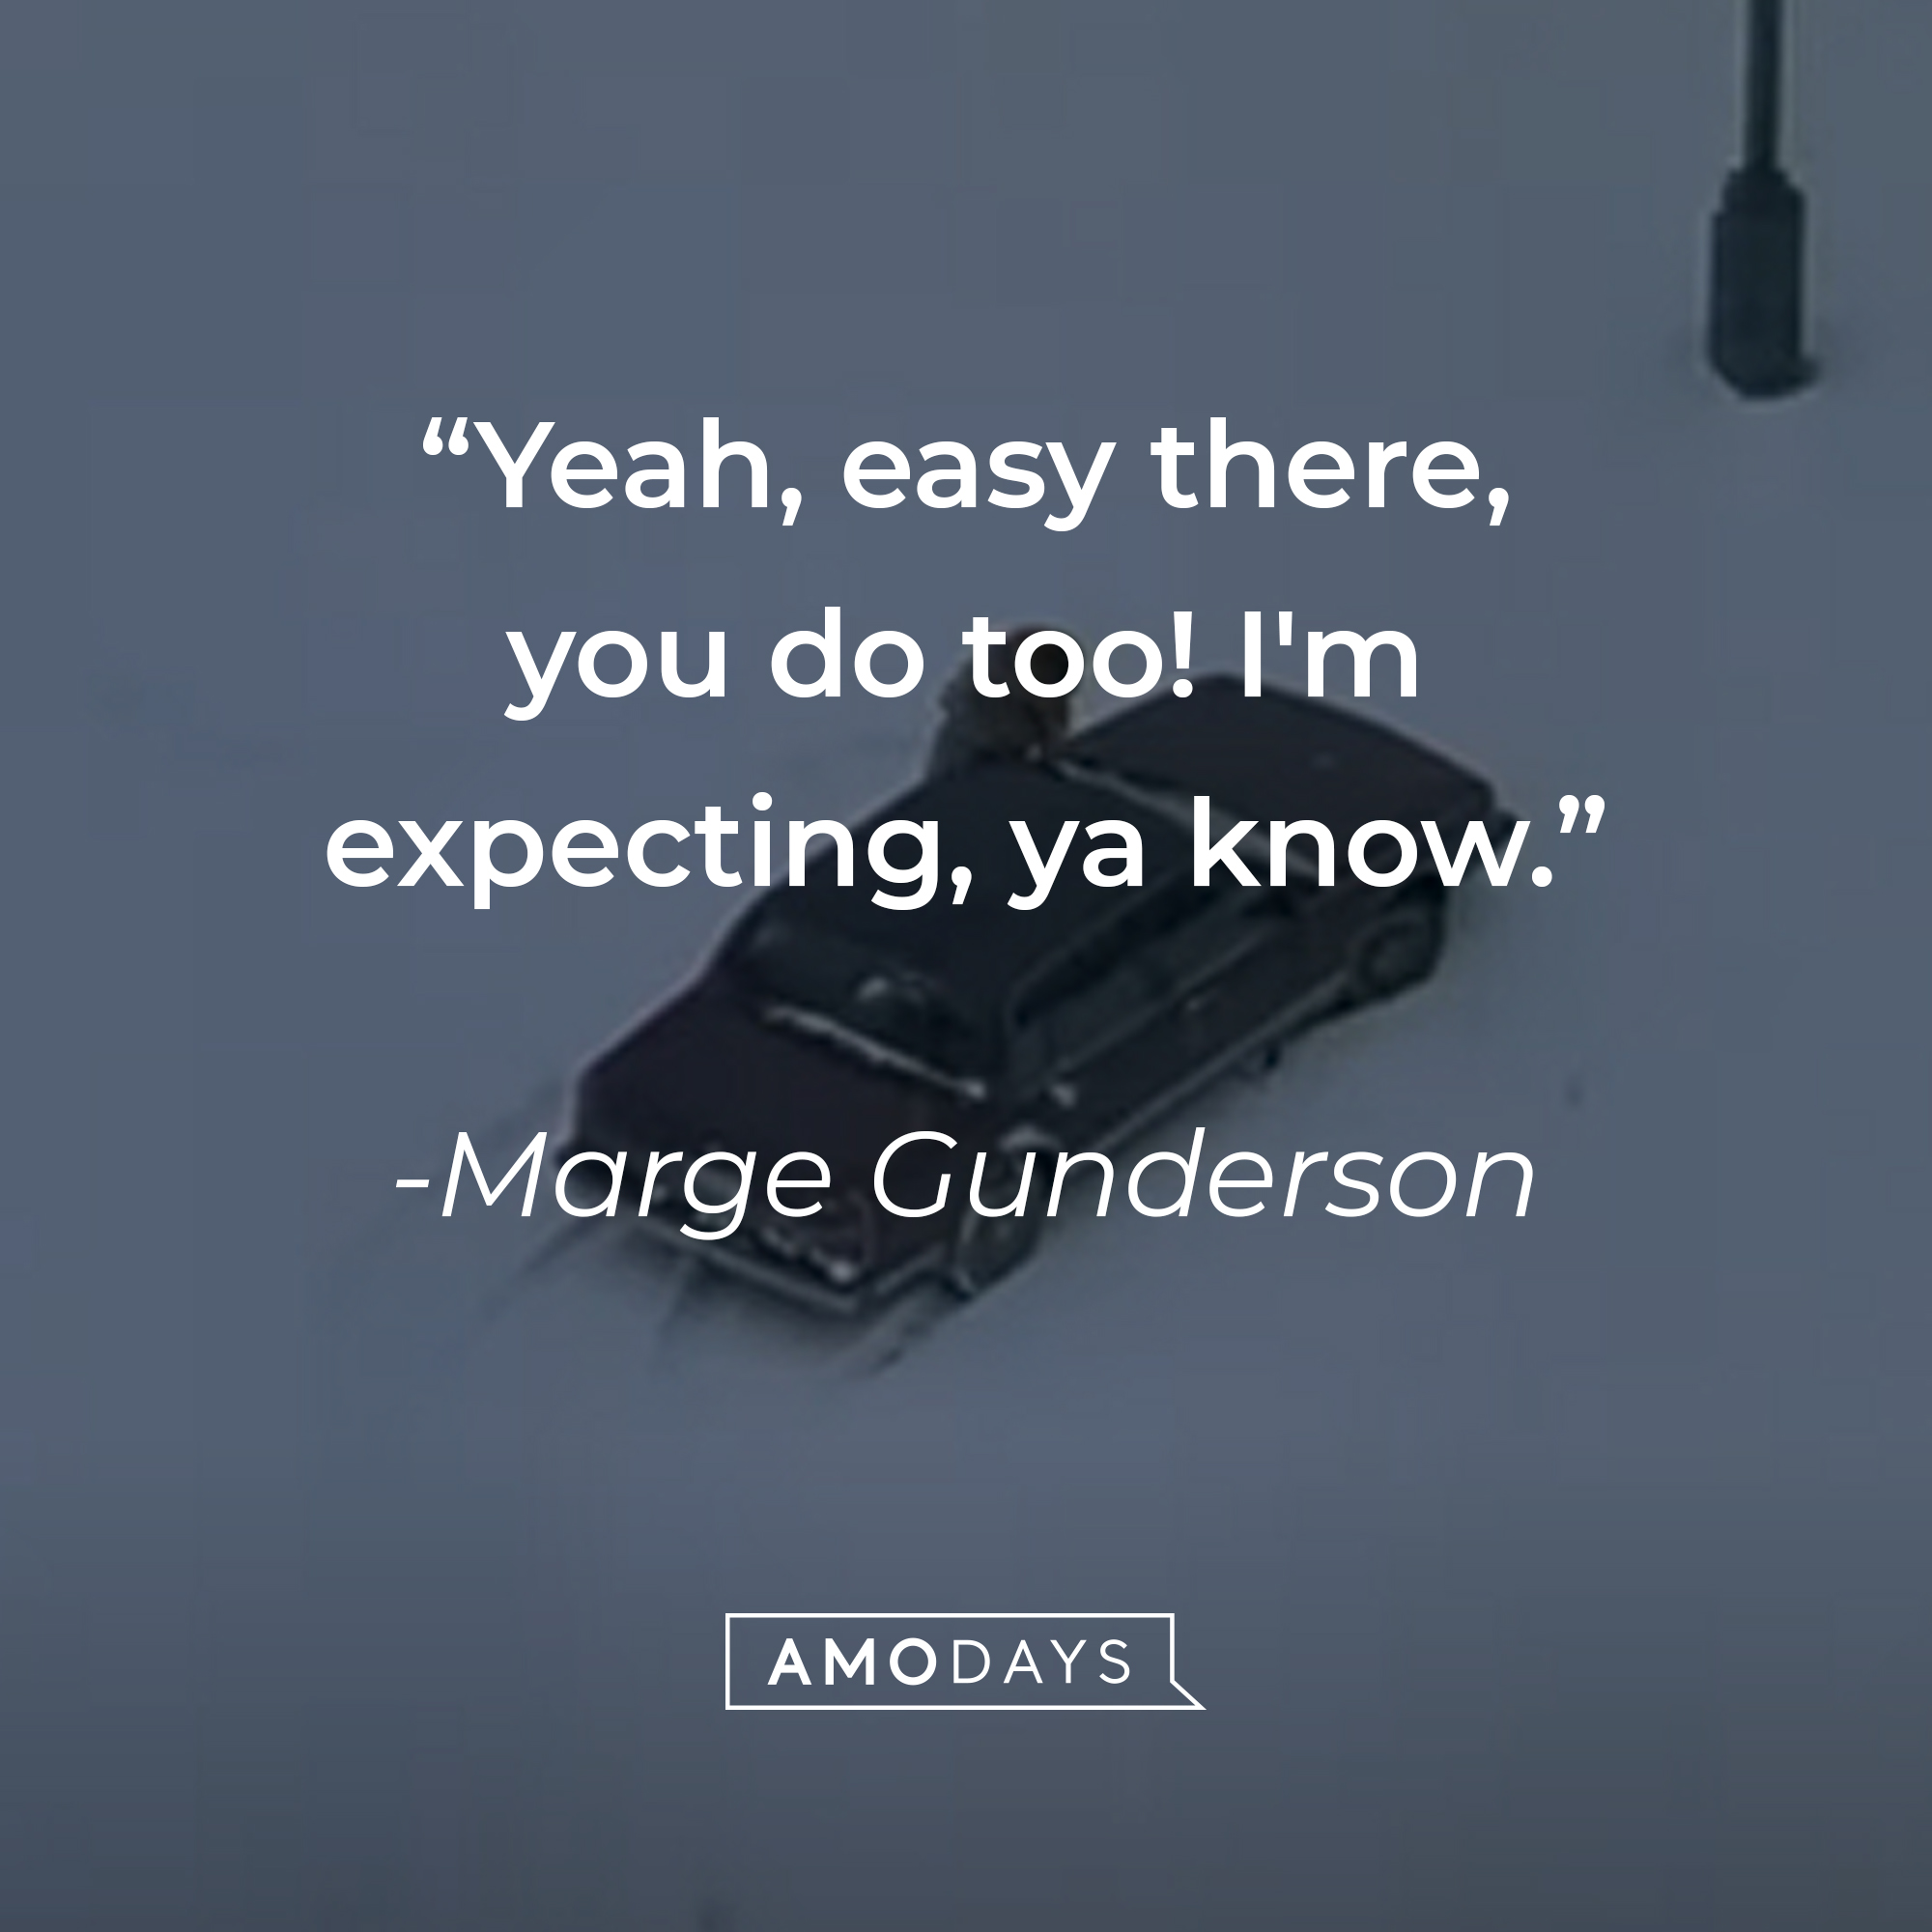 Marge Gunderson's quote: "Yeah, easy there, you do too! I'm expecting, ya know." | Source: youtube.com/MGMStudios